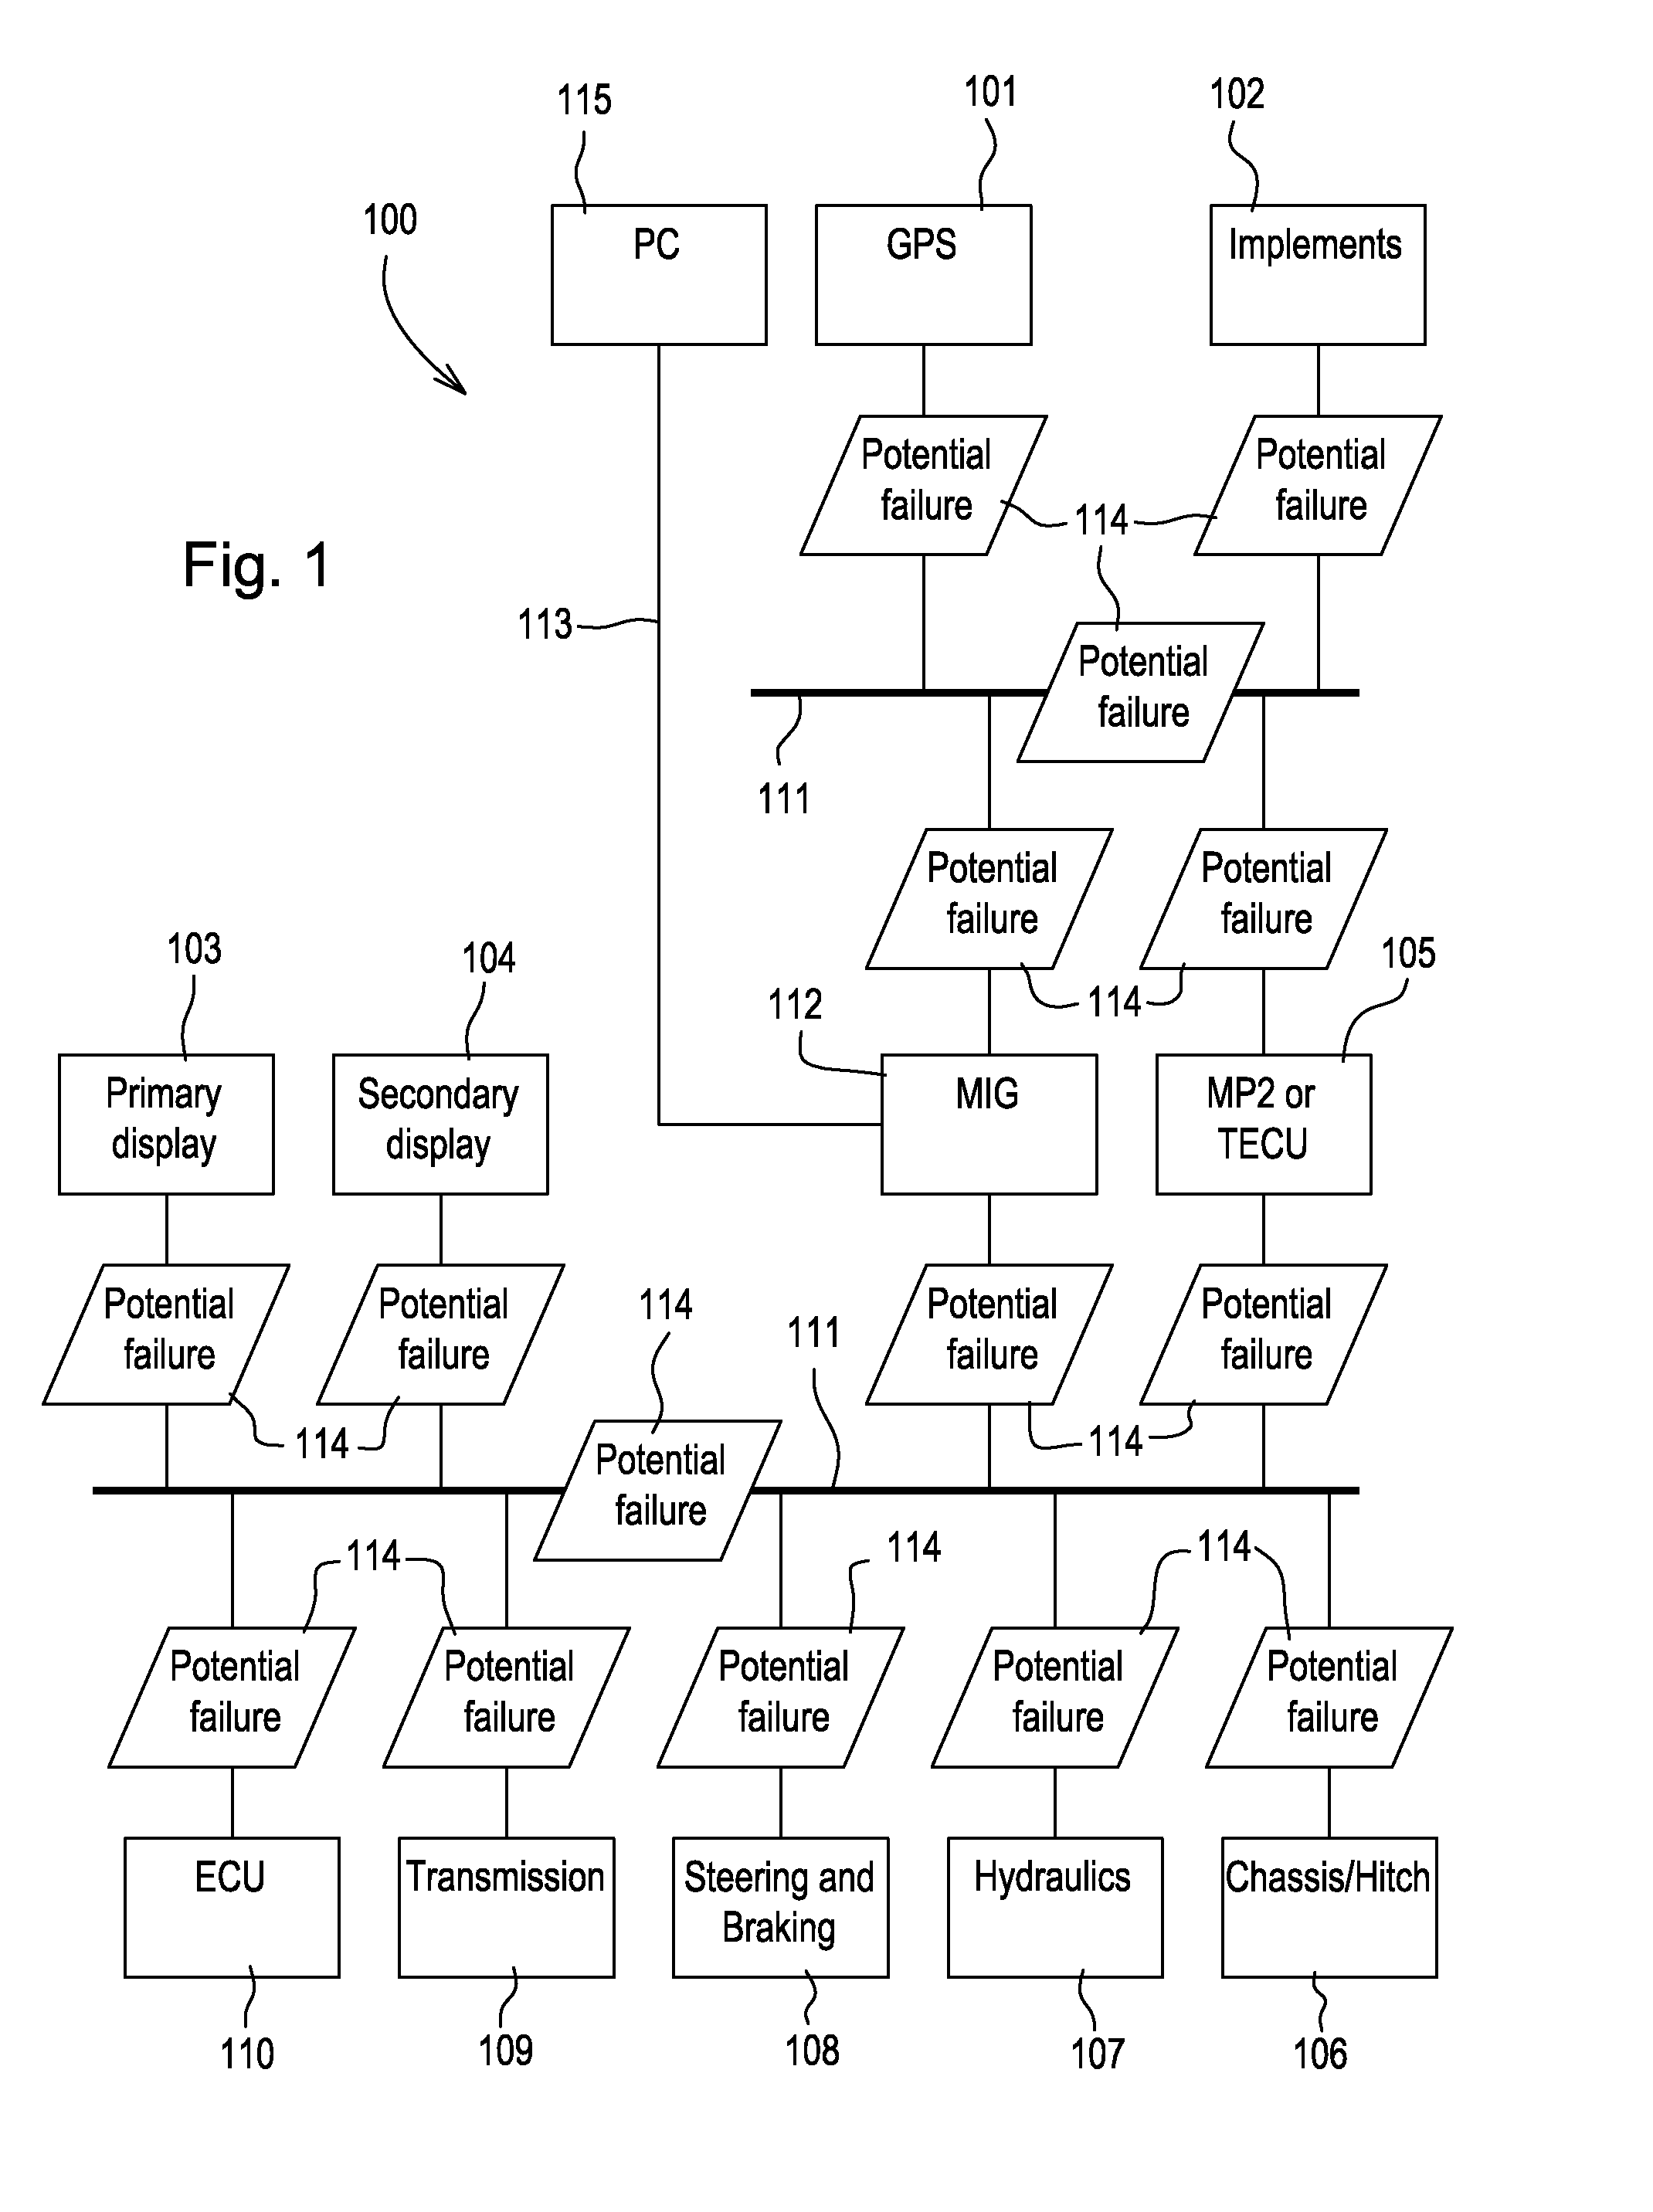 Controller Area Network Condition Monitoring and Bus Health on In-Vehicle Communications Networks